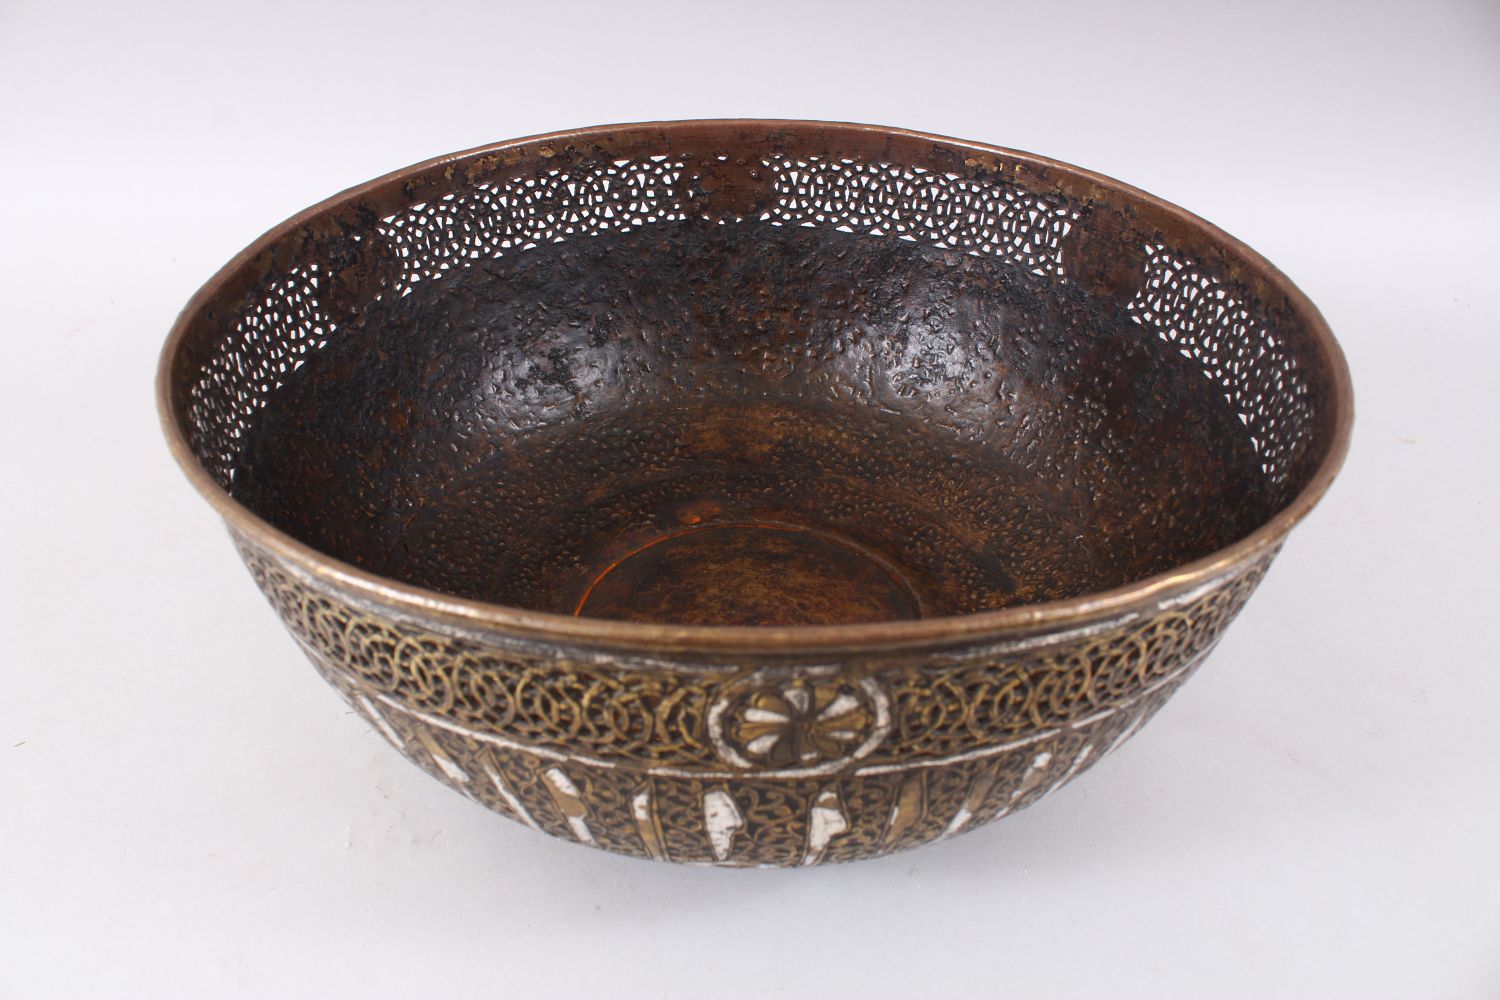 A LARGE 19TH CENTURY OR EARLIER SILVER INLAID BRASS MAMLUK REVIVAL BOWL, the body of the bowl with - Image 5 of 6